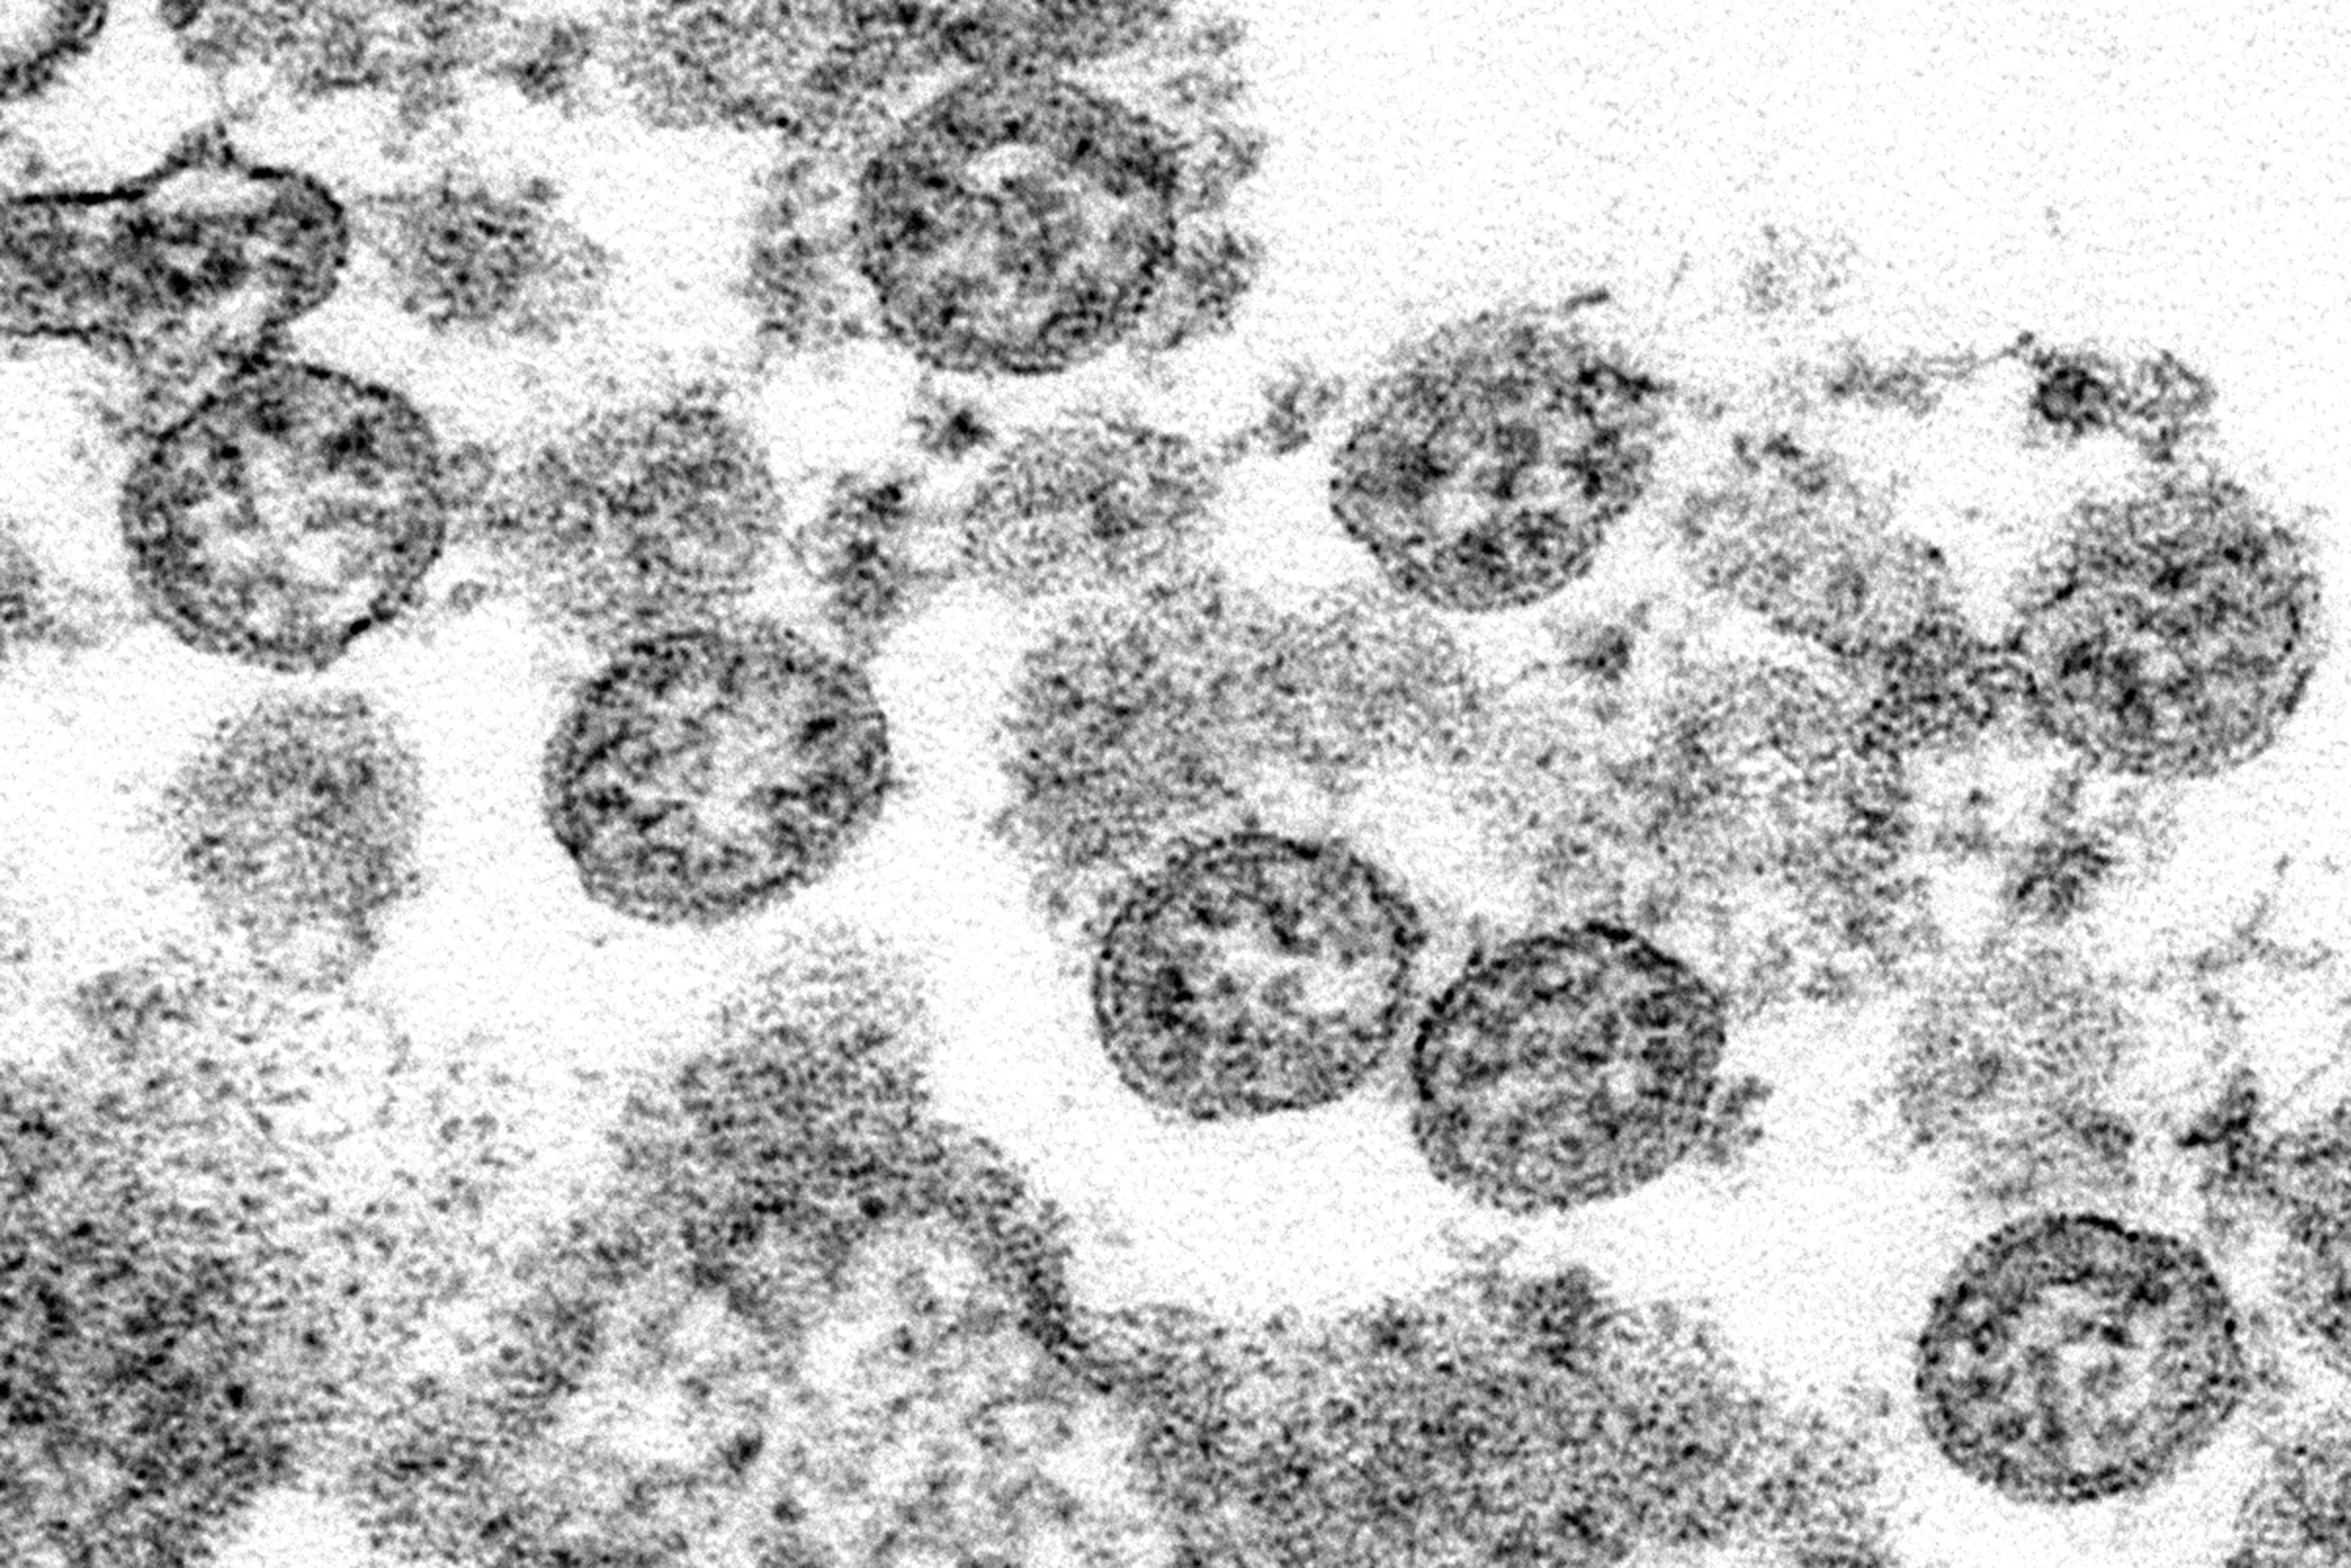 Spherical coronavirus particles, captured on an electron microscope, believed to be from the first case of Covid-19 in the US — new research suggests the virus could have reached America earlier than previously thought